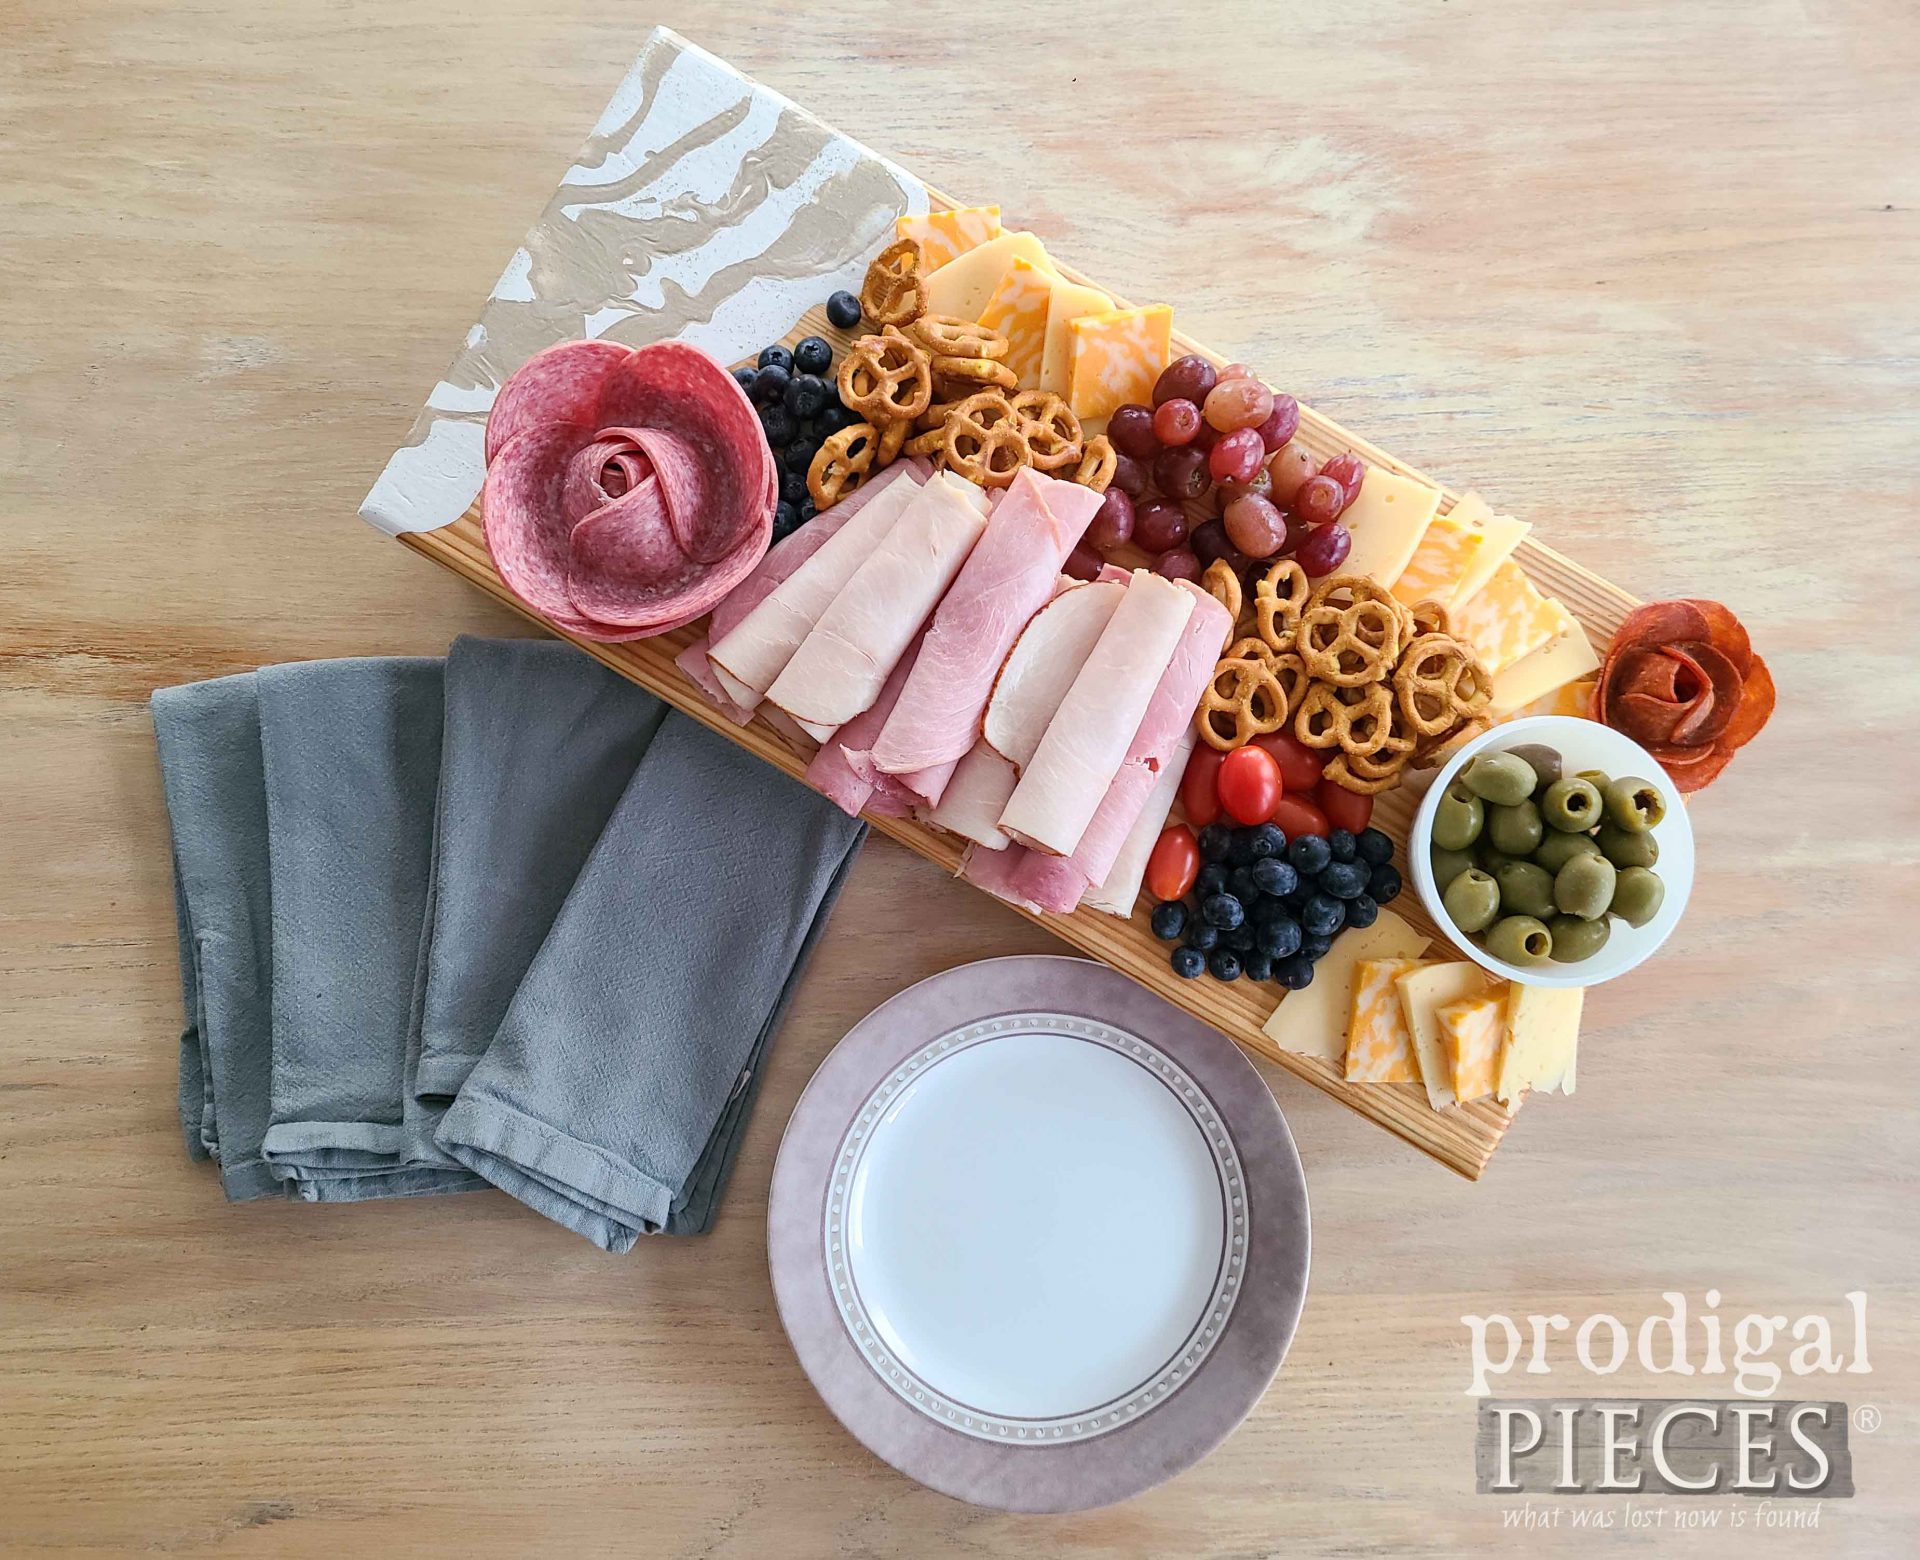 DIY Handmade Charcuterie Board from Reclaimed Wood by Larissa of Prodigal Pieces | prodigalpieces.com #prodigalpieces #handmade #charcuterie #food #nomnom